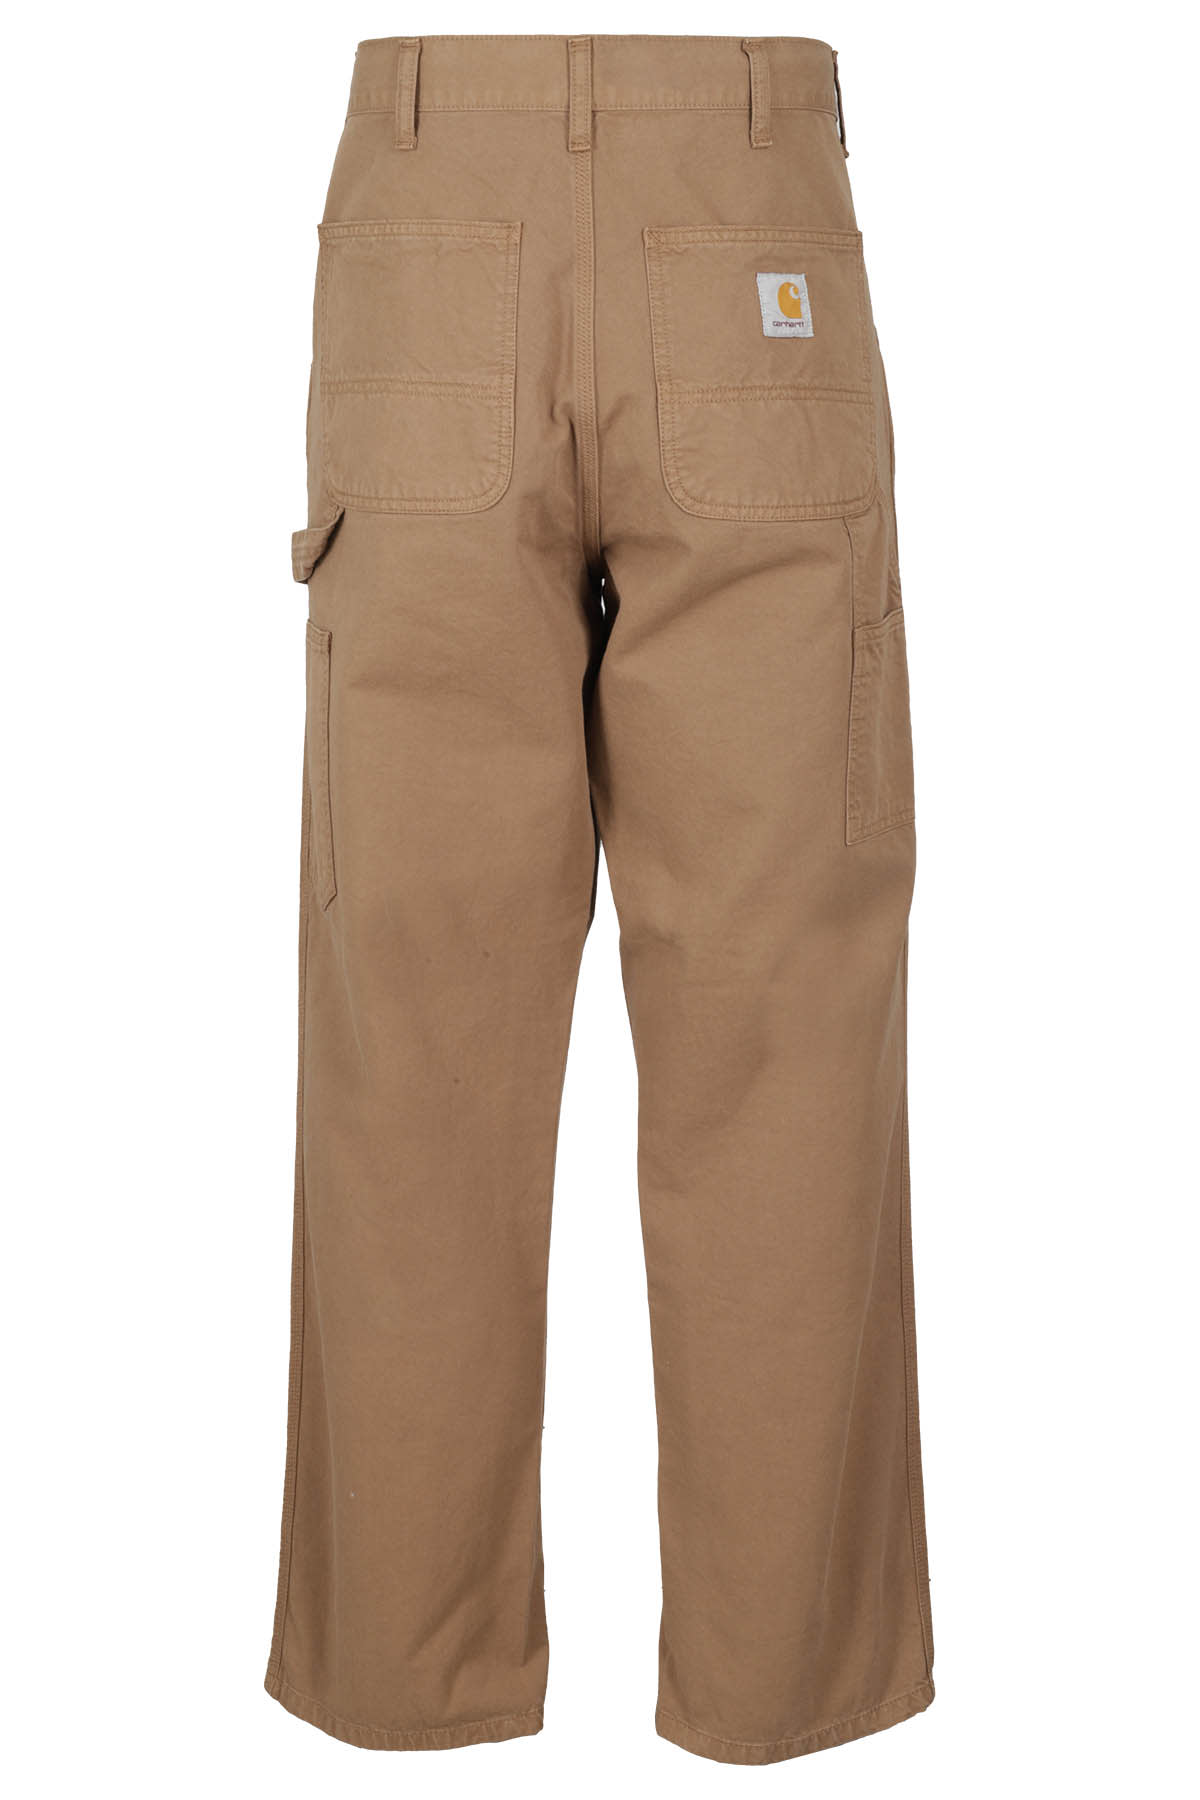 Shop Carhartt Single Knee Pant Newcomb Drill In Buffalo Garment Dyed